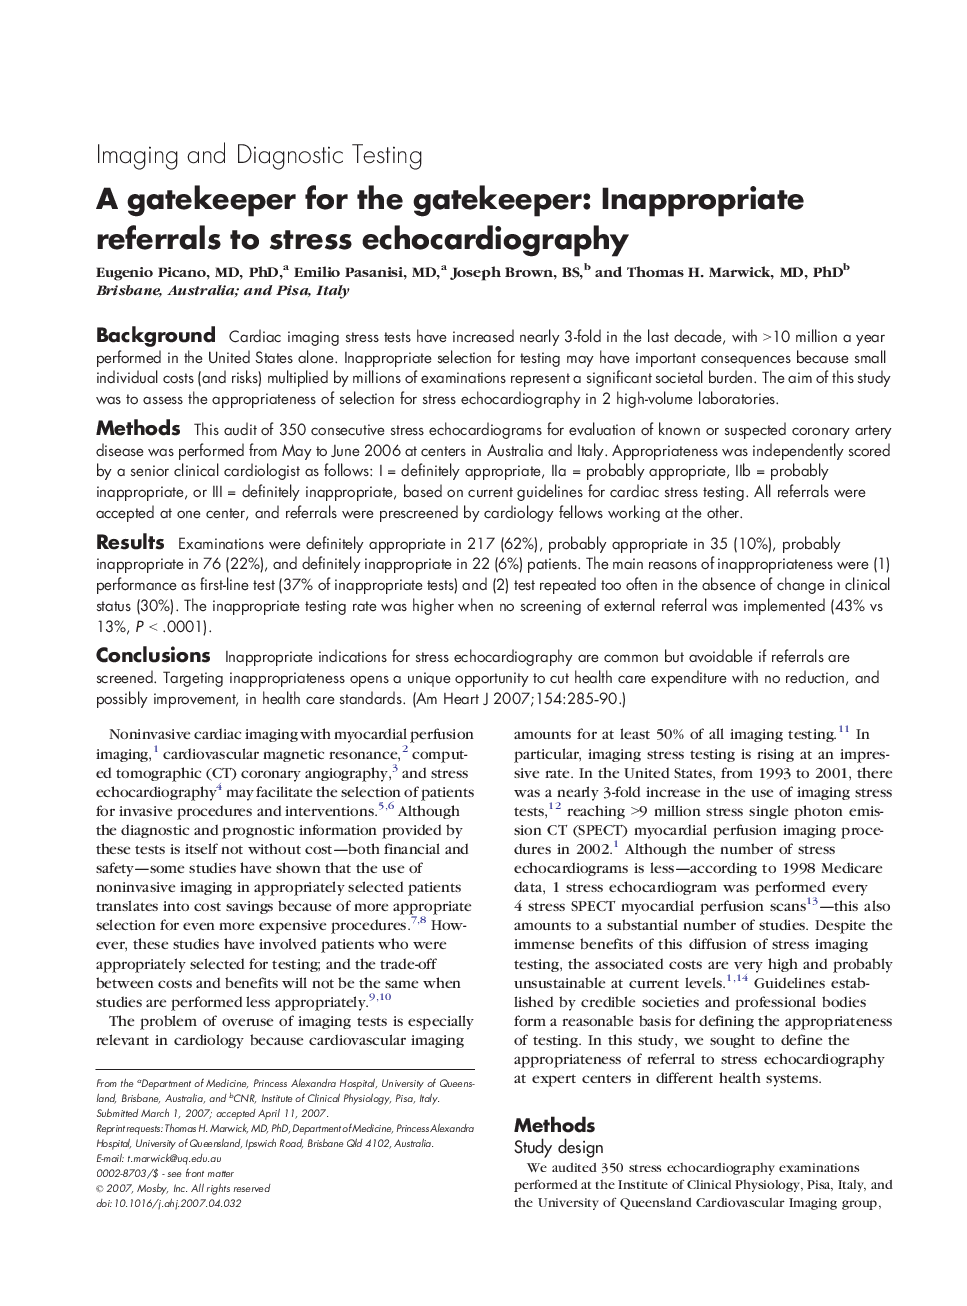 A gatekeeper for the gatekeeper: Inappropriate referrals to stress echocardiography